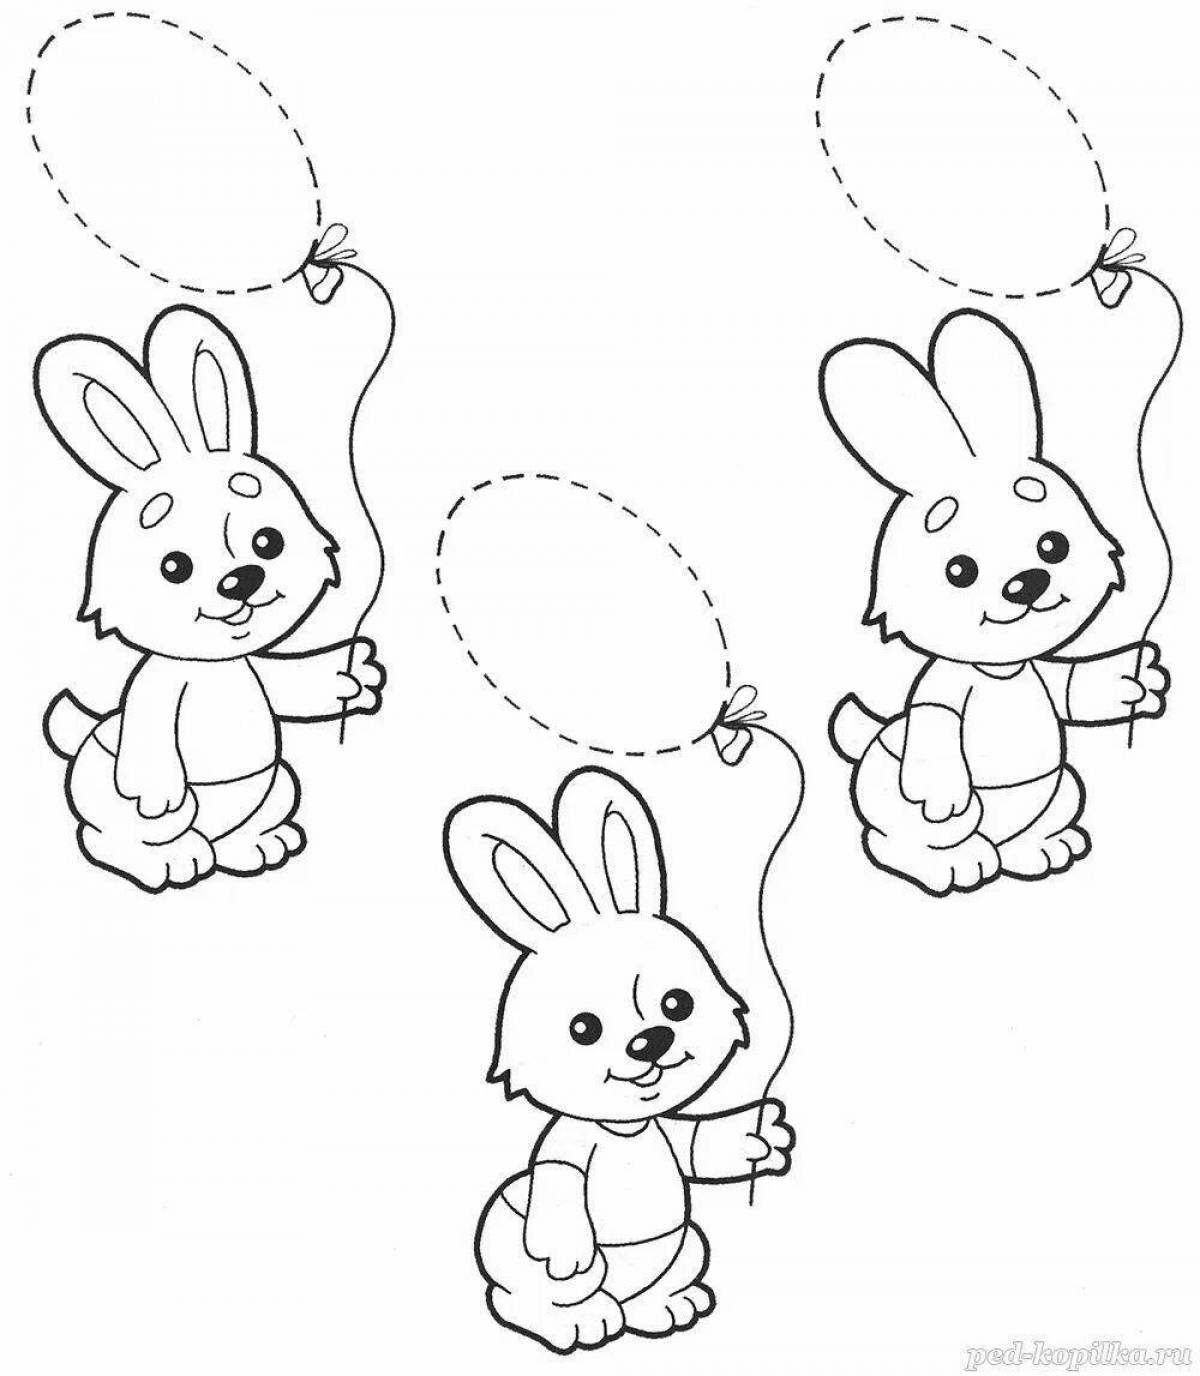 Coloring book animated rabbit toy